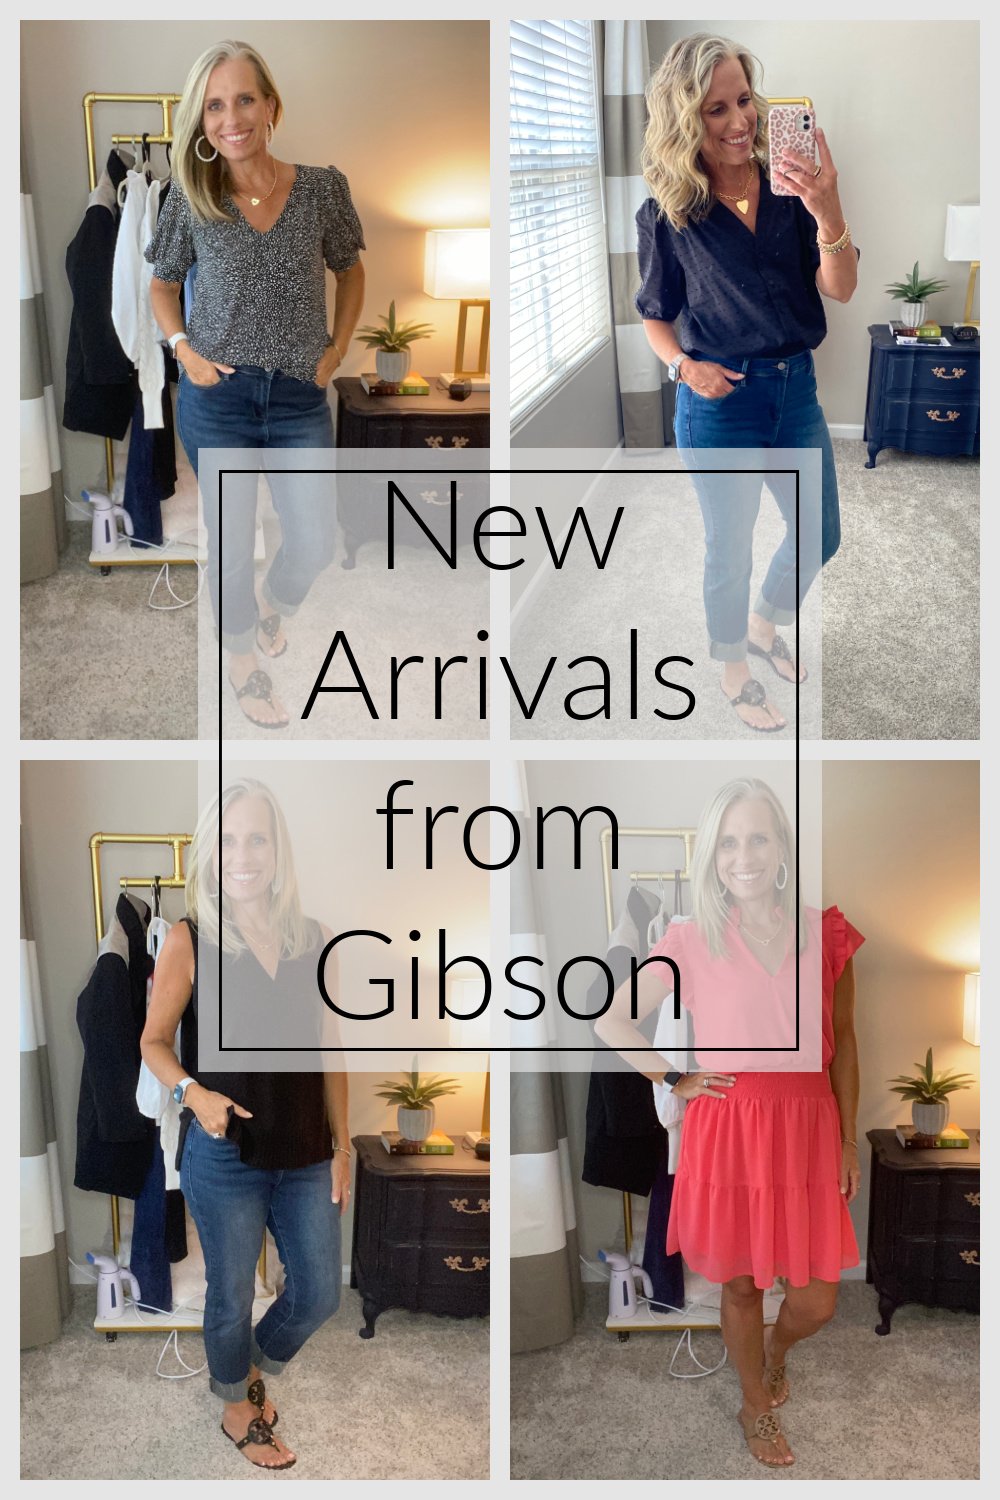 New Arrivals from Gibson